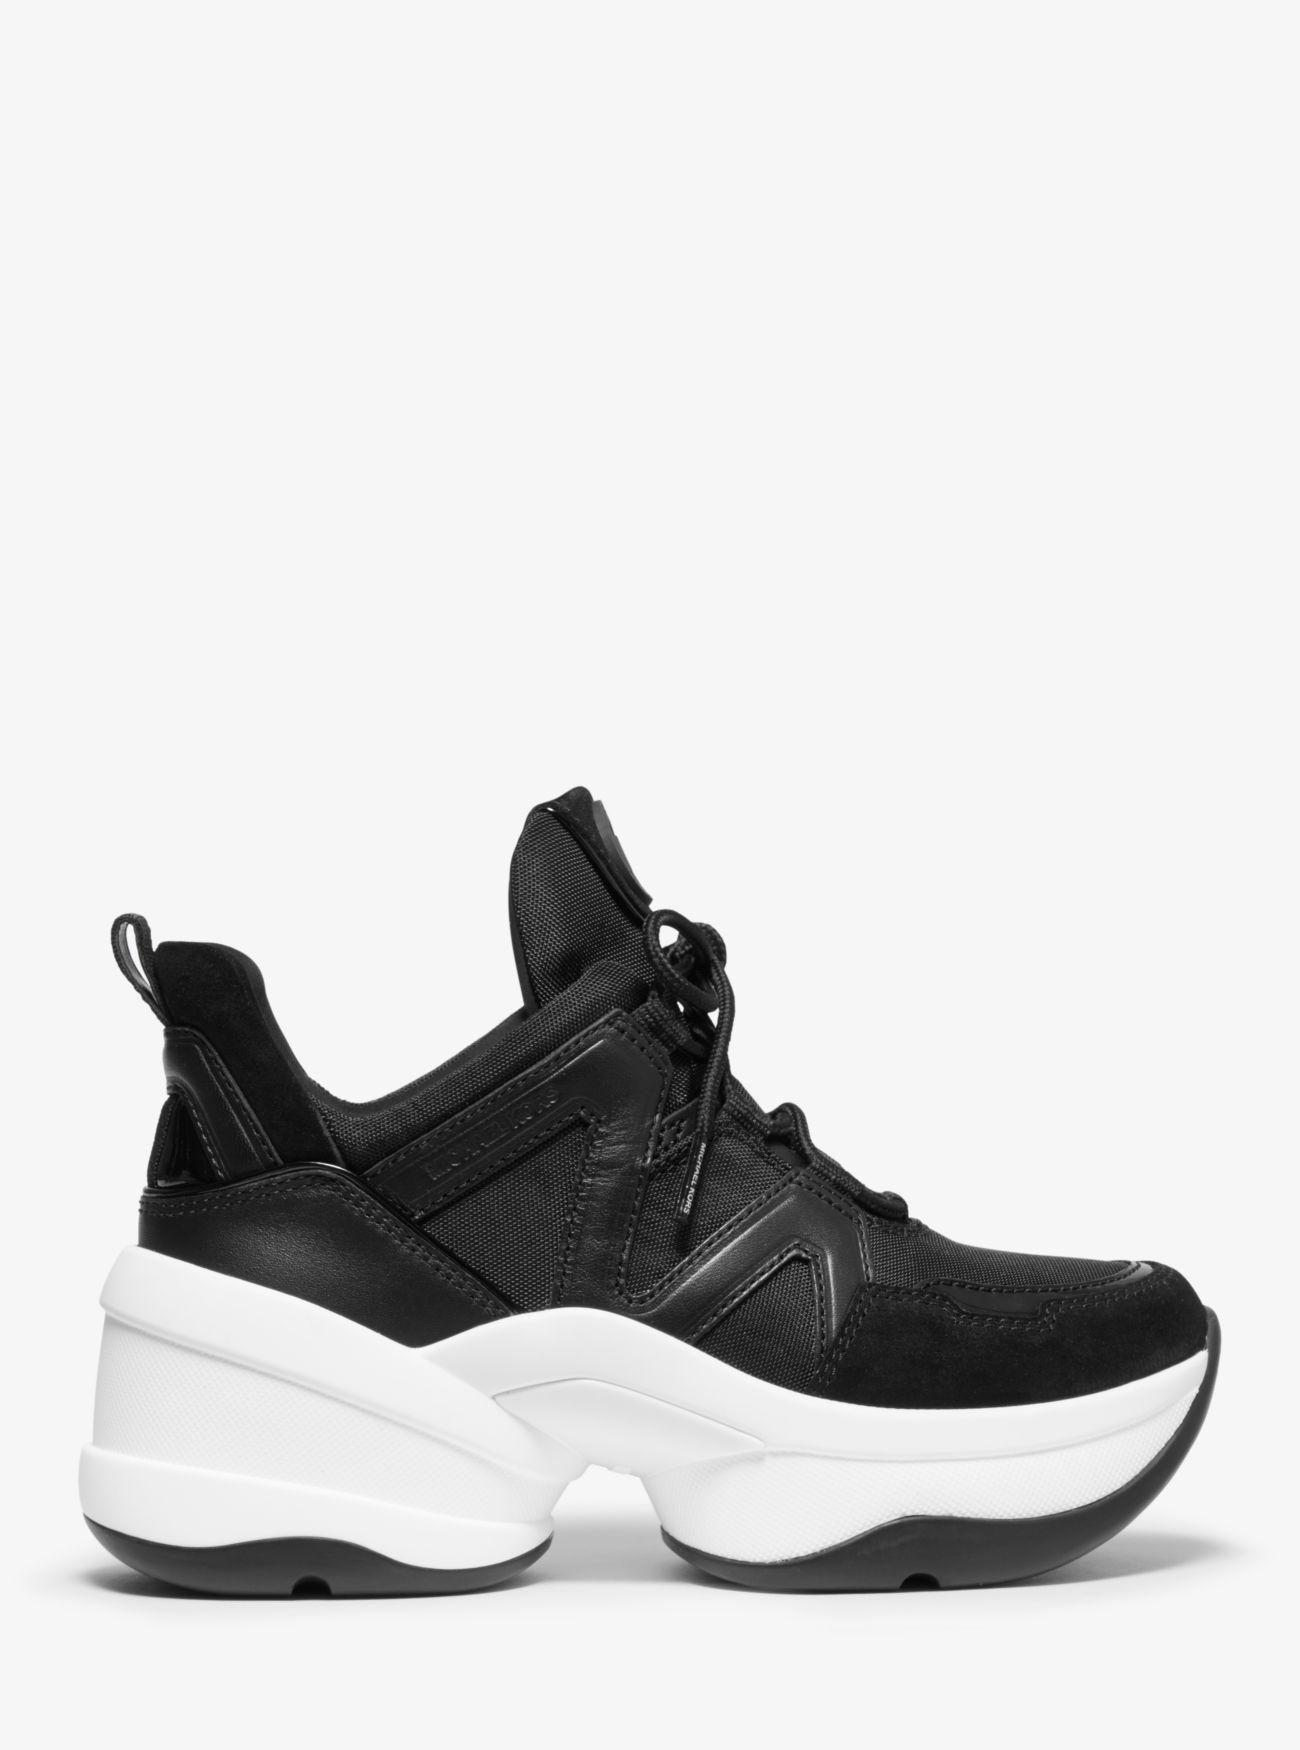 Michael Kors Olympia Canvas And Suede Trainer in Black/White (Black) - Save  18% - Lyst